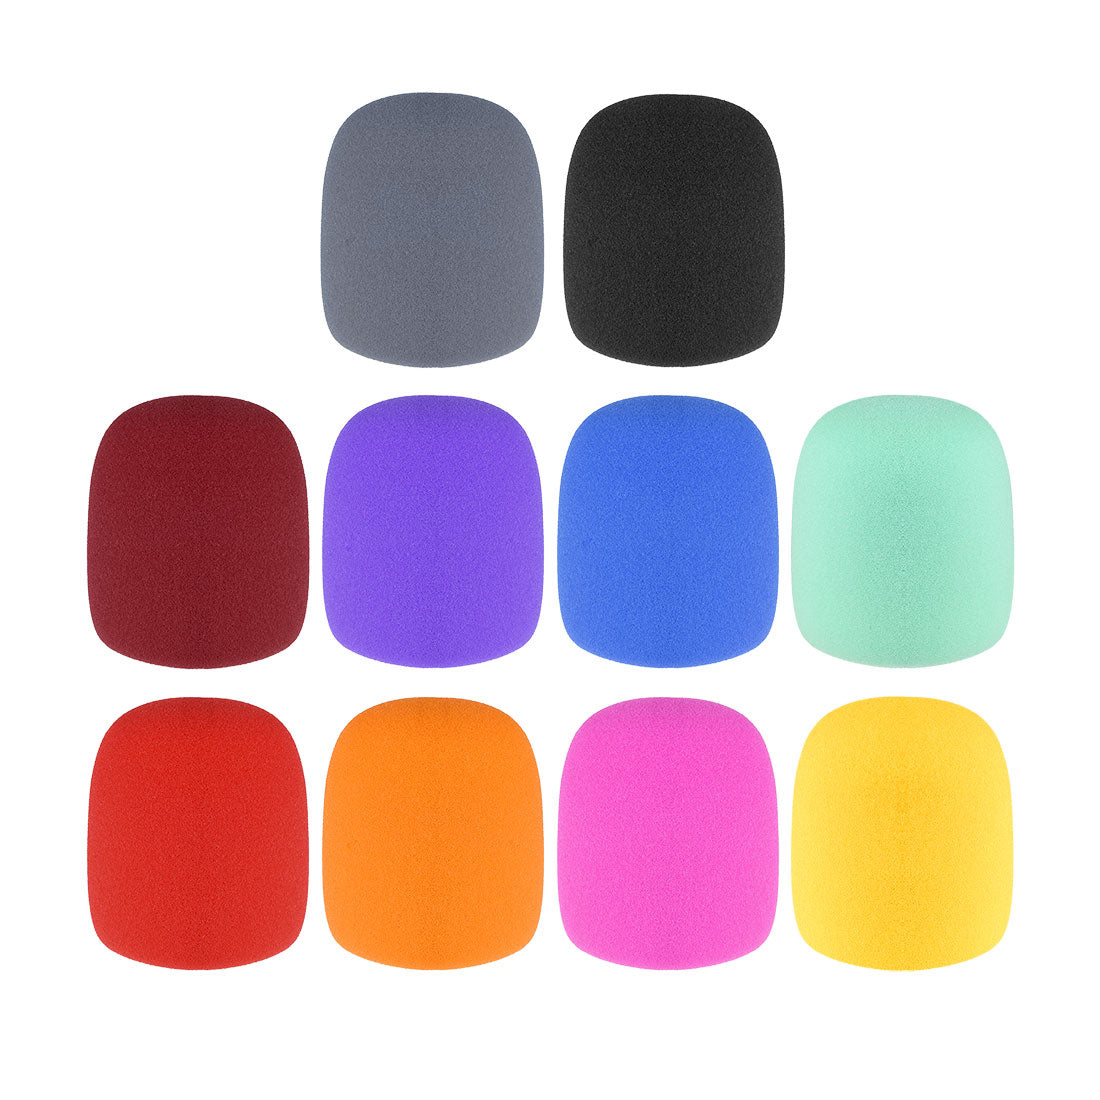 uxcell Uxcell 10 Pack Thicken Sponge Foam Mic Cover Handheld Microphone Windscreen Pack for KTV